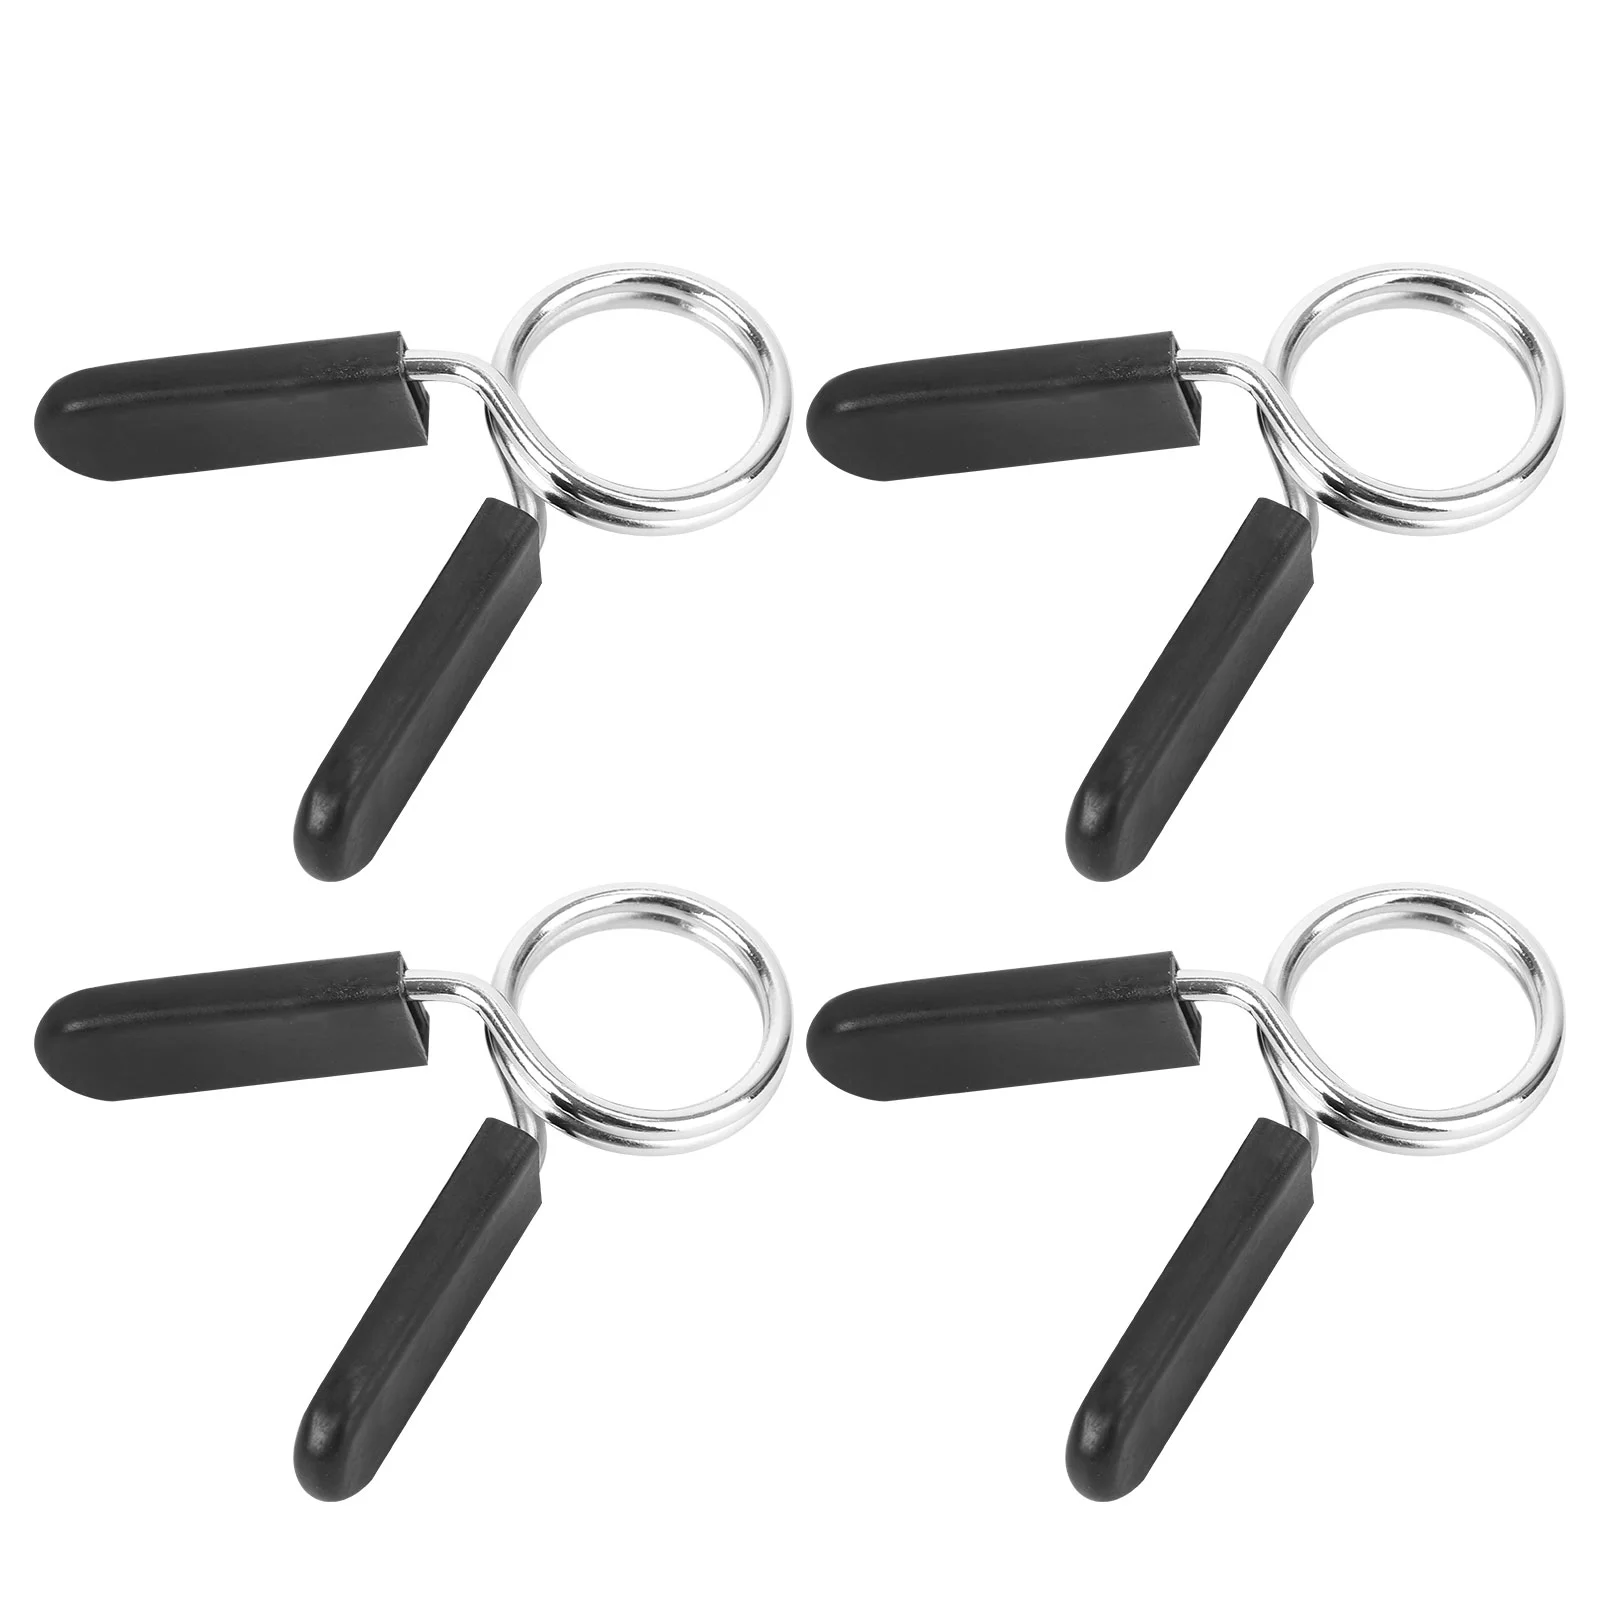 

4pcs 28mm Spring Clip Collars Dumbbell Barbell Clamps for Weightlifting and Strength Training